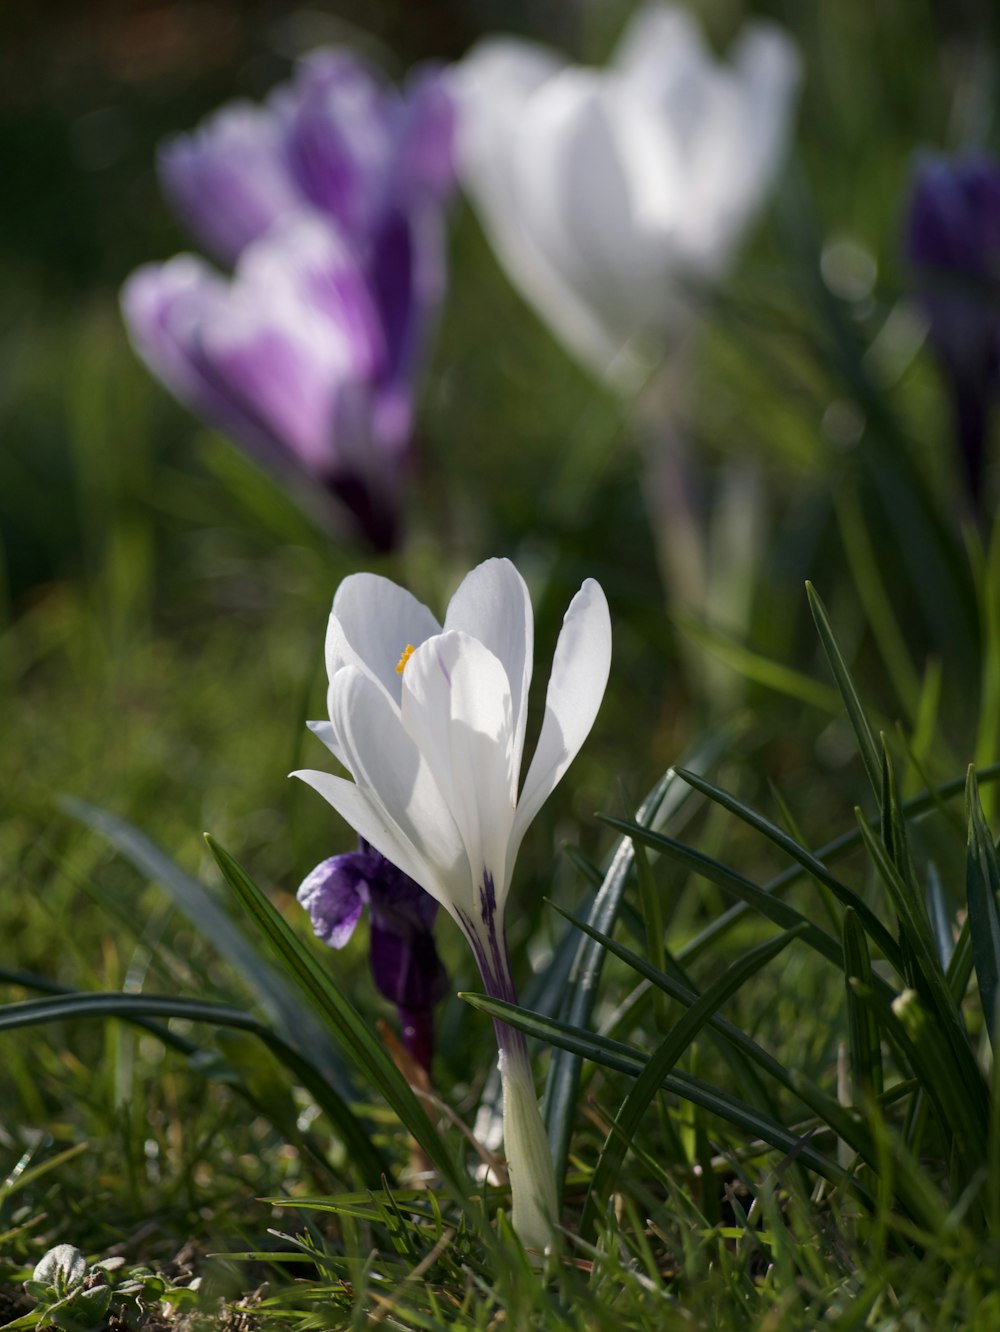 a group of white and purple flowers in the grass